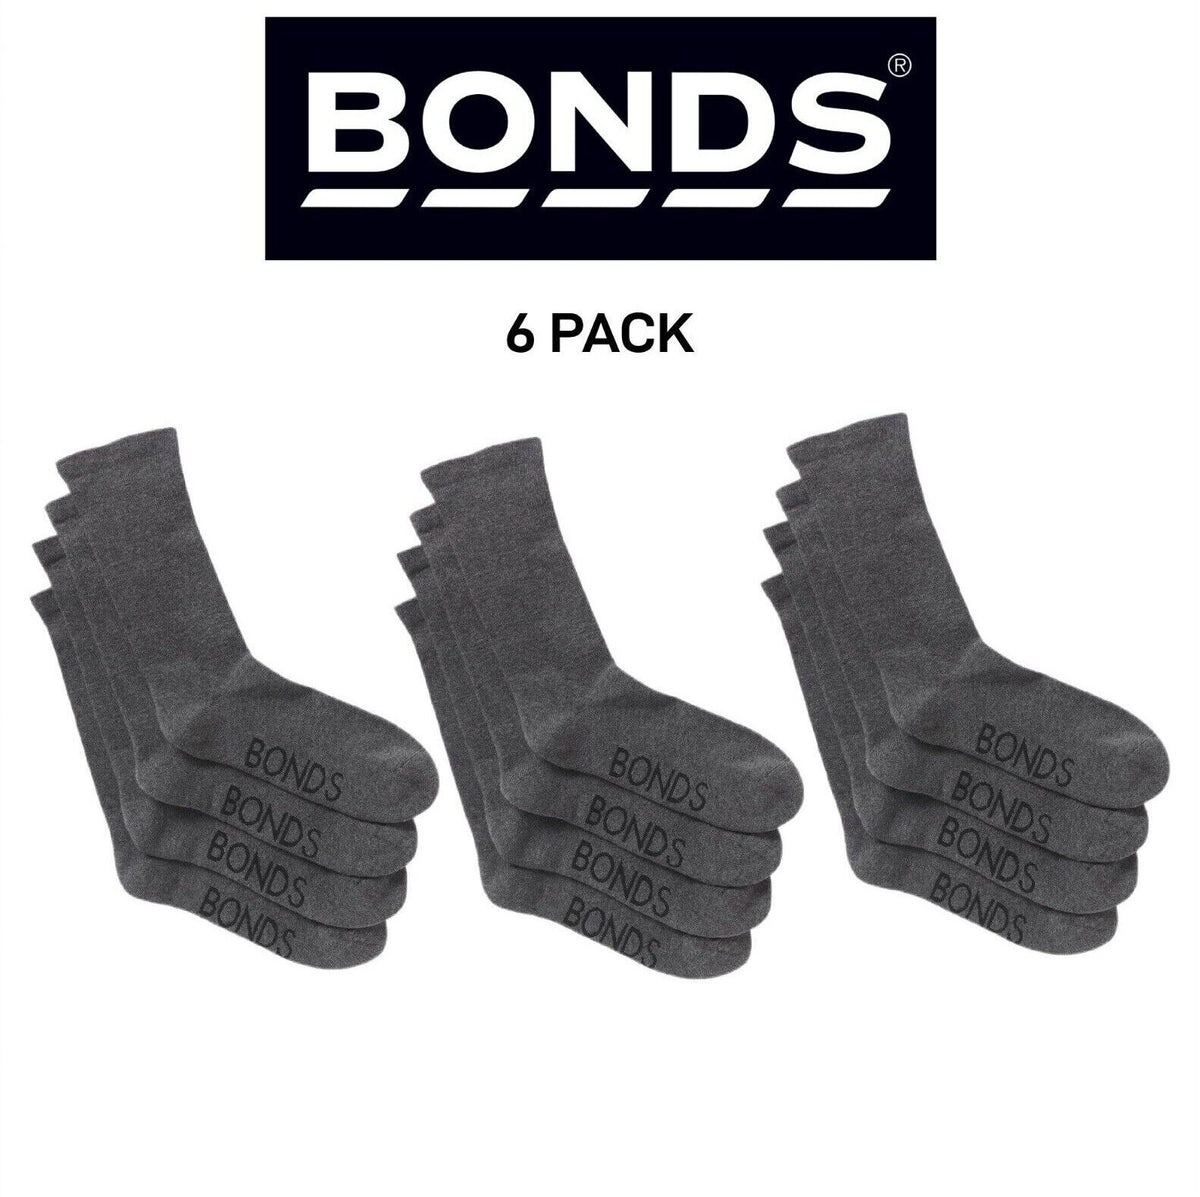 Bonds Mens Very Comfy Crew Socks Comfortable Cushioned Sole 6 Pack SZFP2N